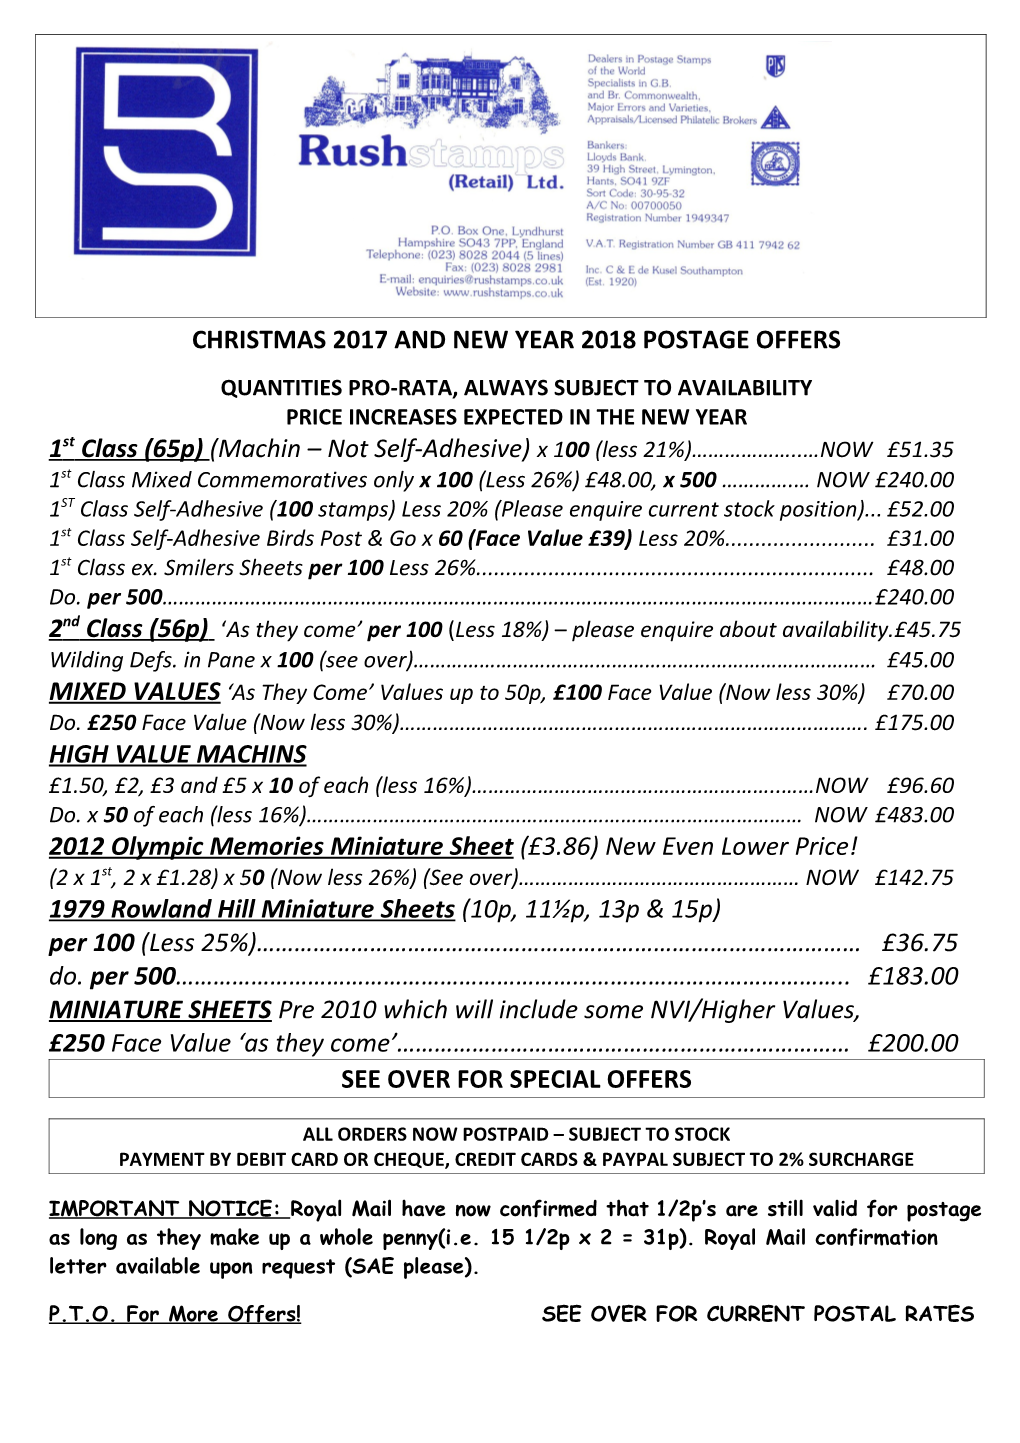 Christmas 2017 and New Year 2018 Postage Offers